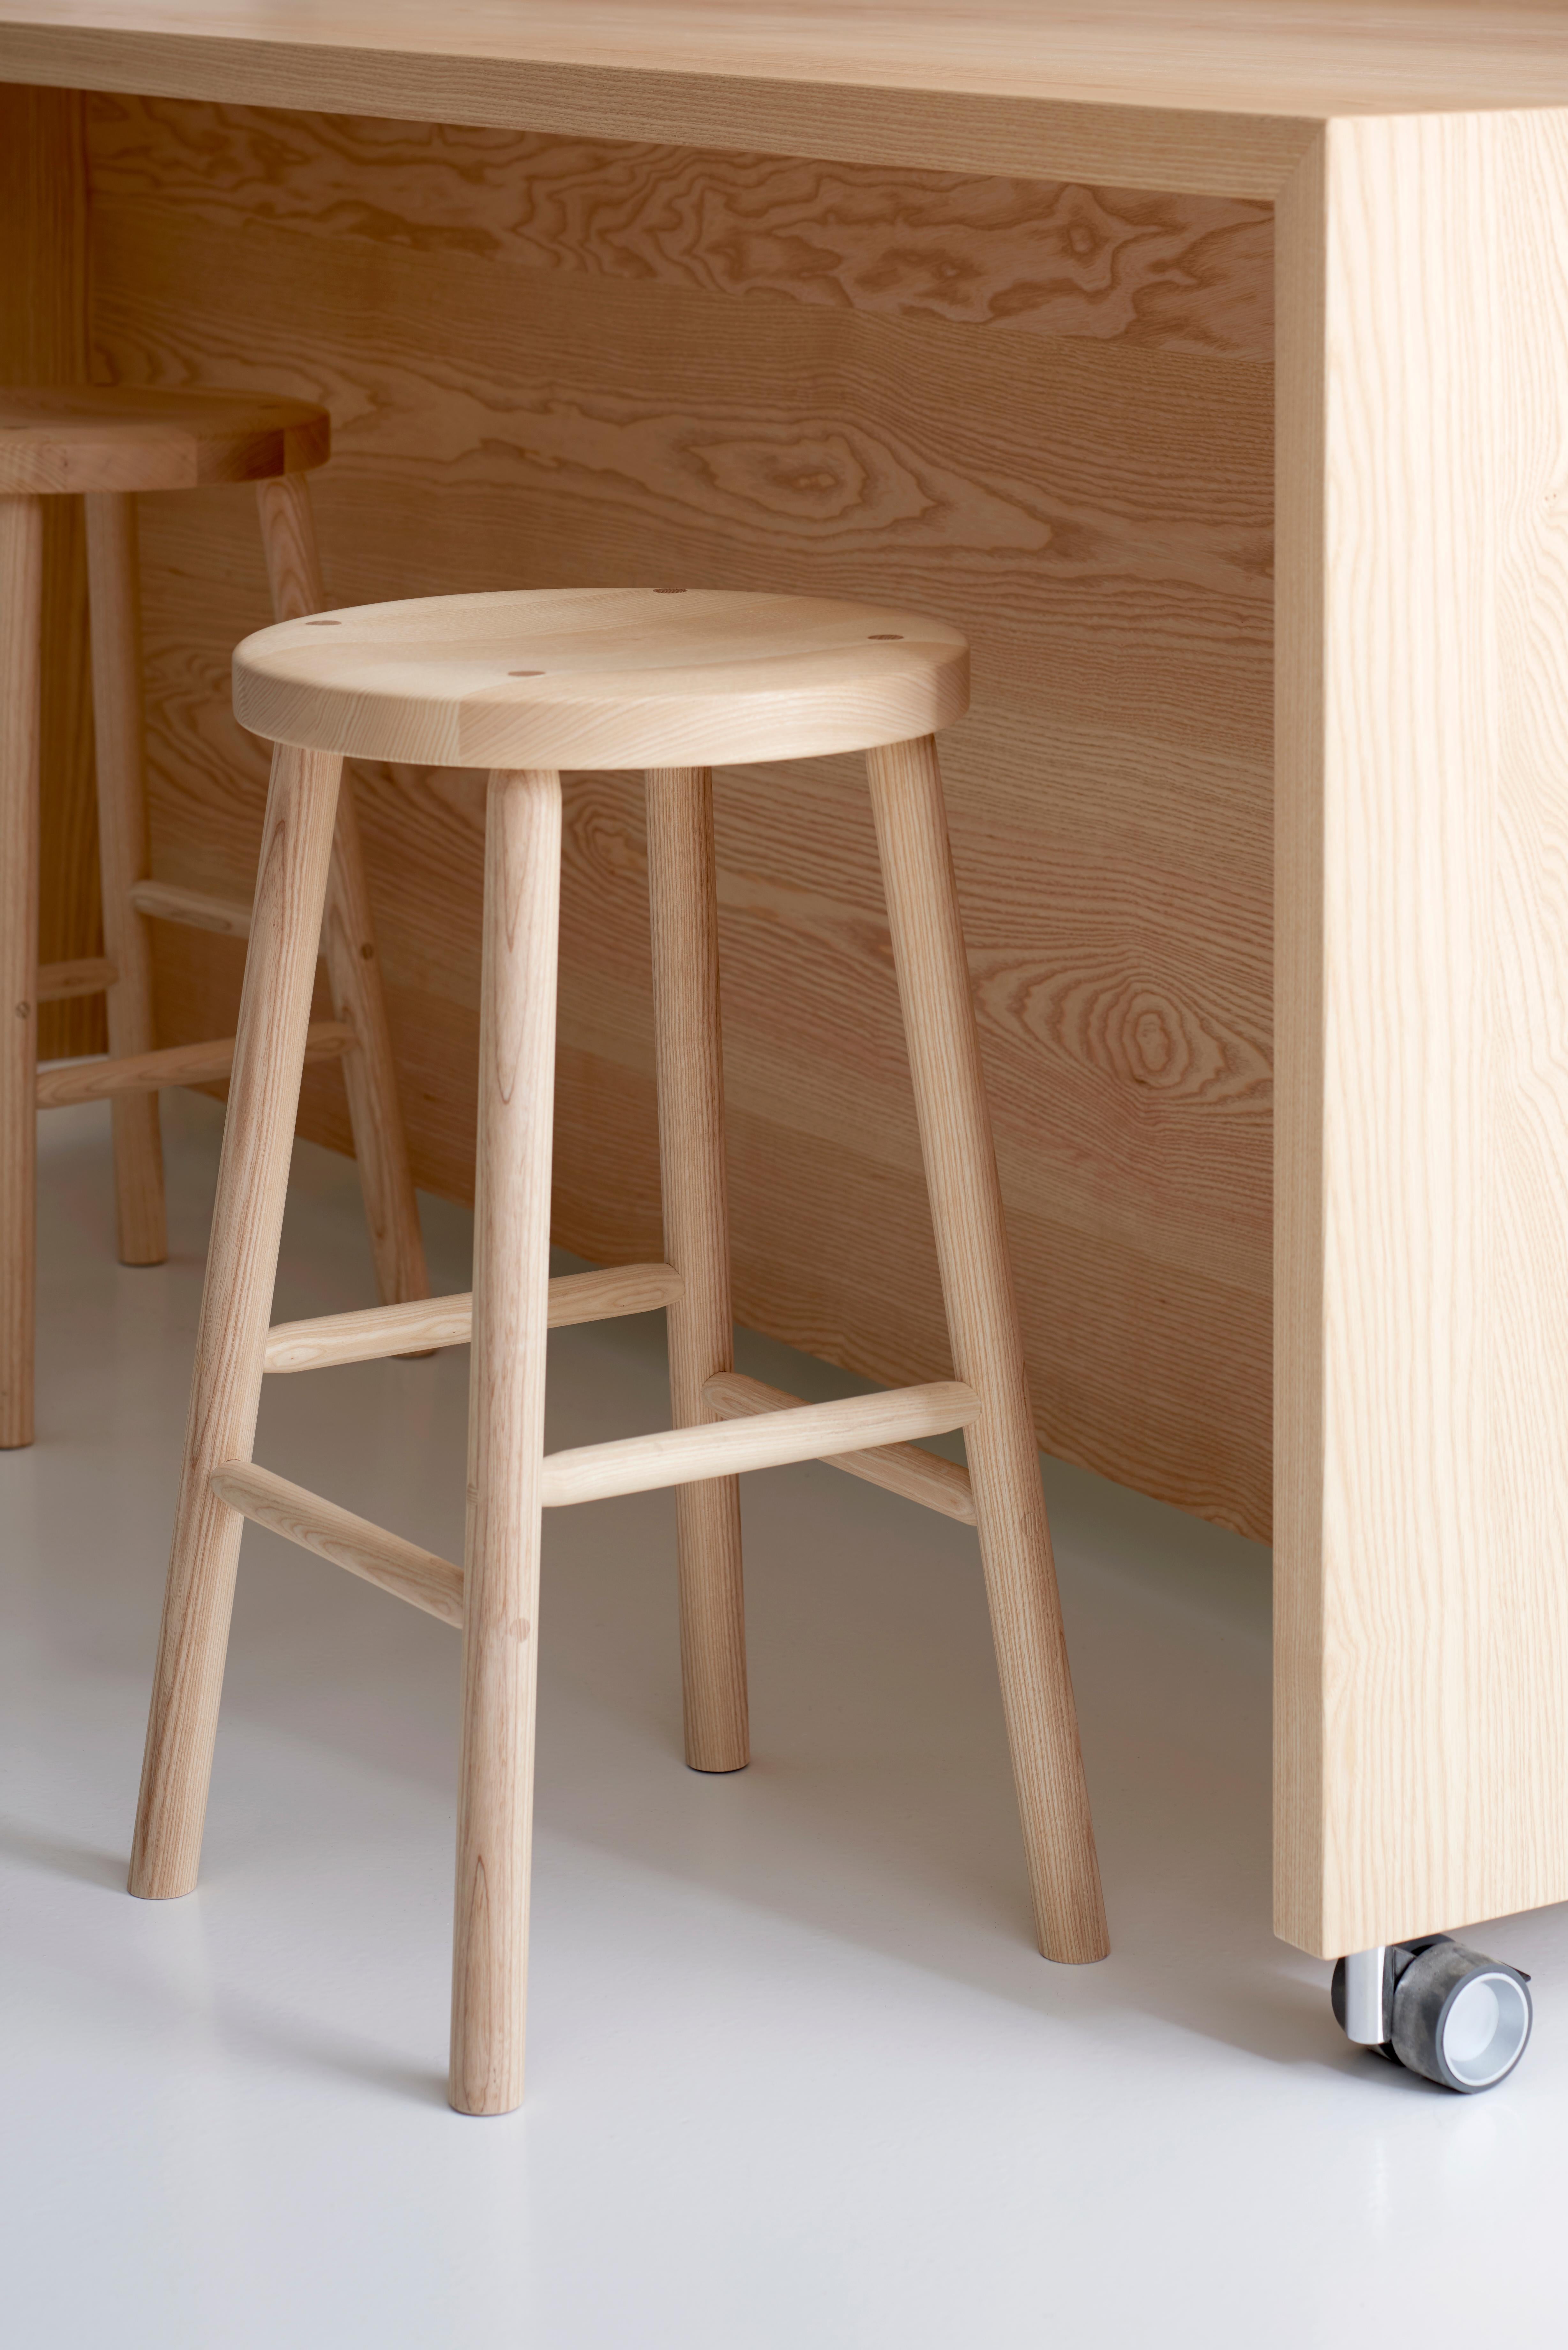 The four-legged stool is designed for both contract environment and domestic use with durable joints, comfortable seat and three different heights. Its Nordic craftsmanship soul can be spotted in the delicate joinery details, where the designer, the